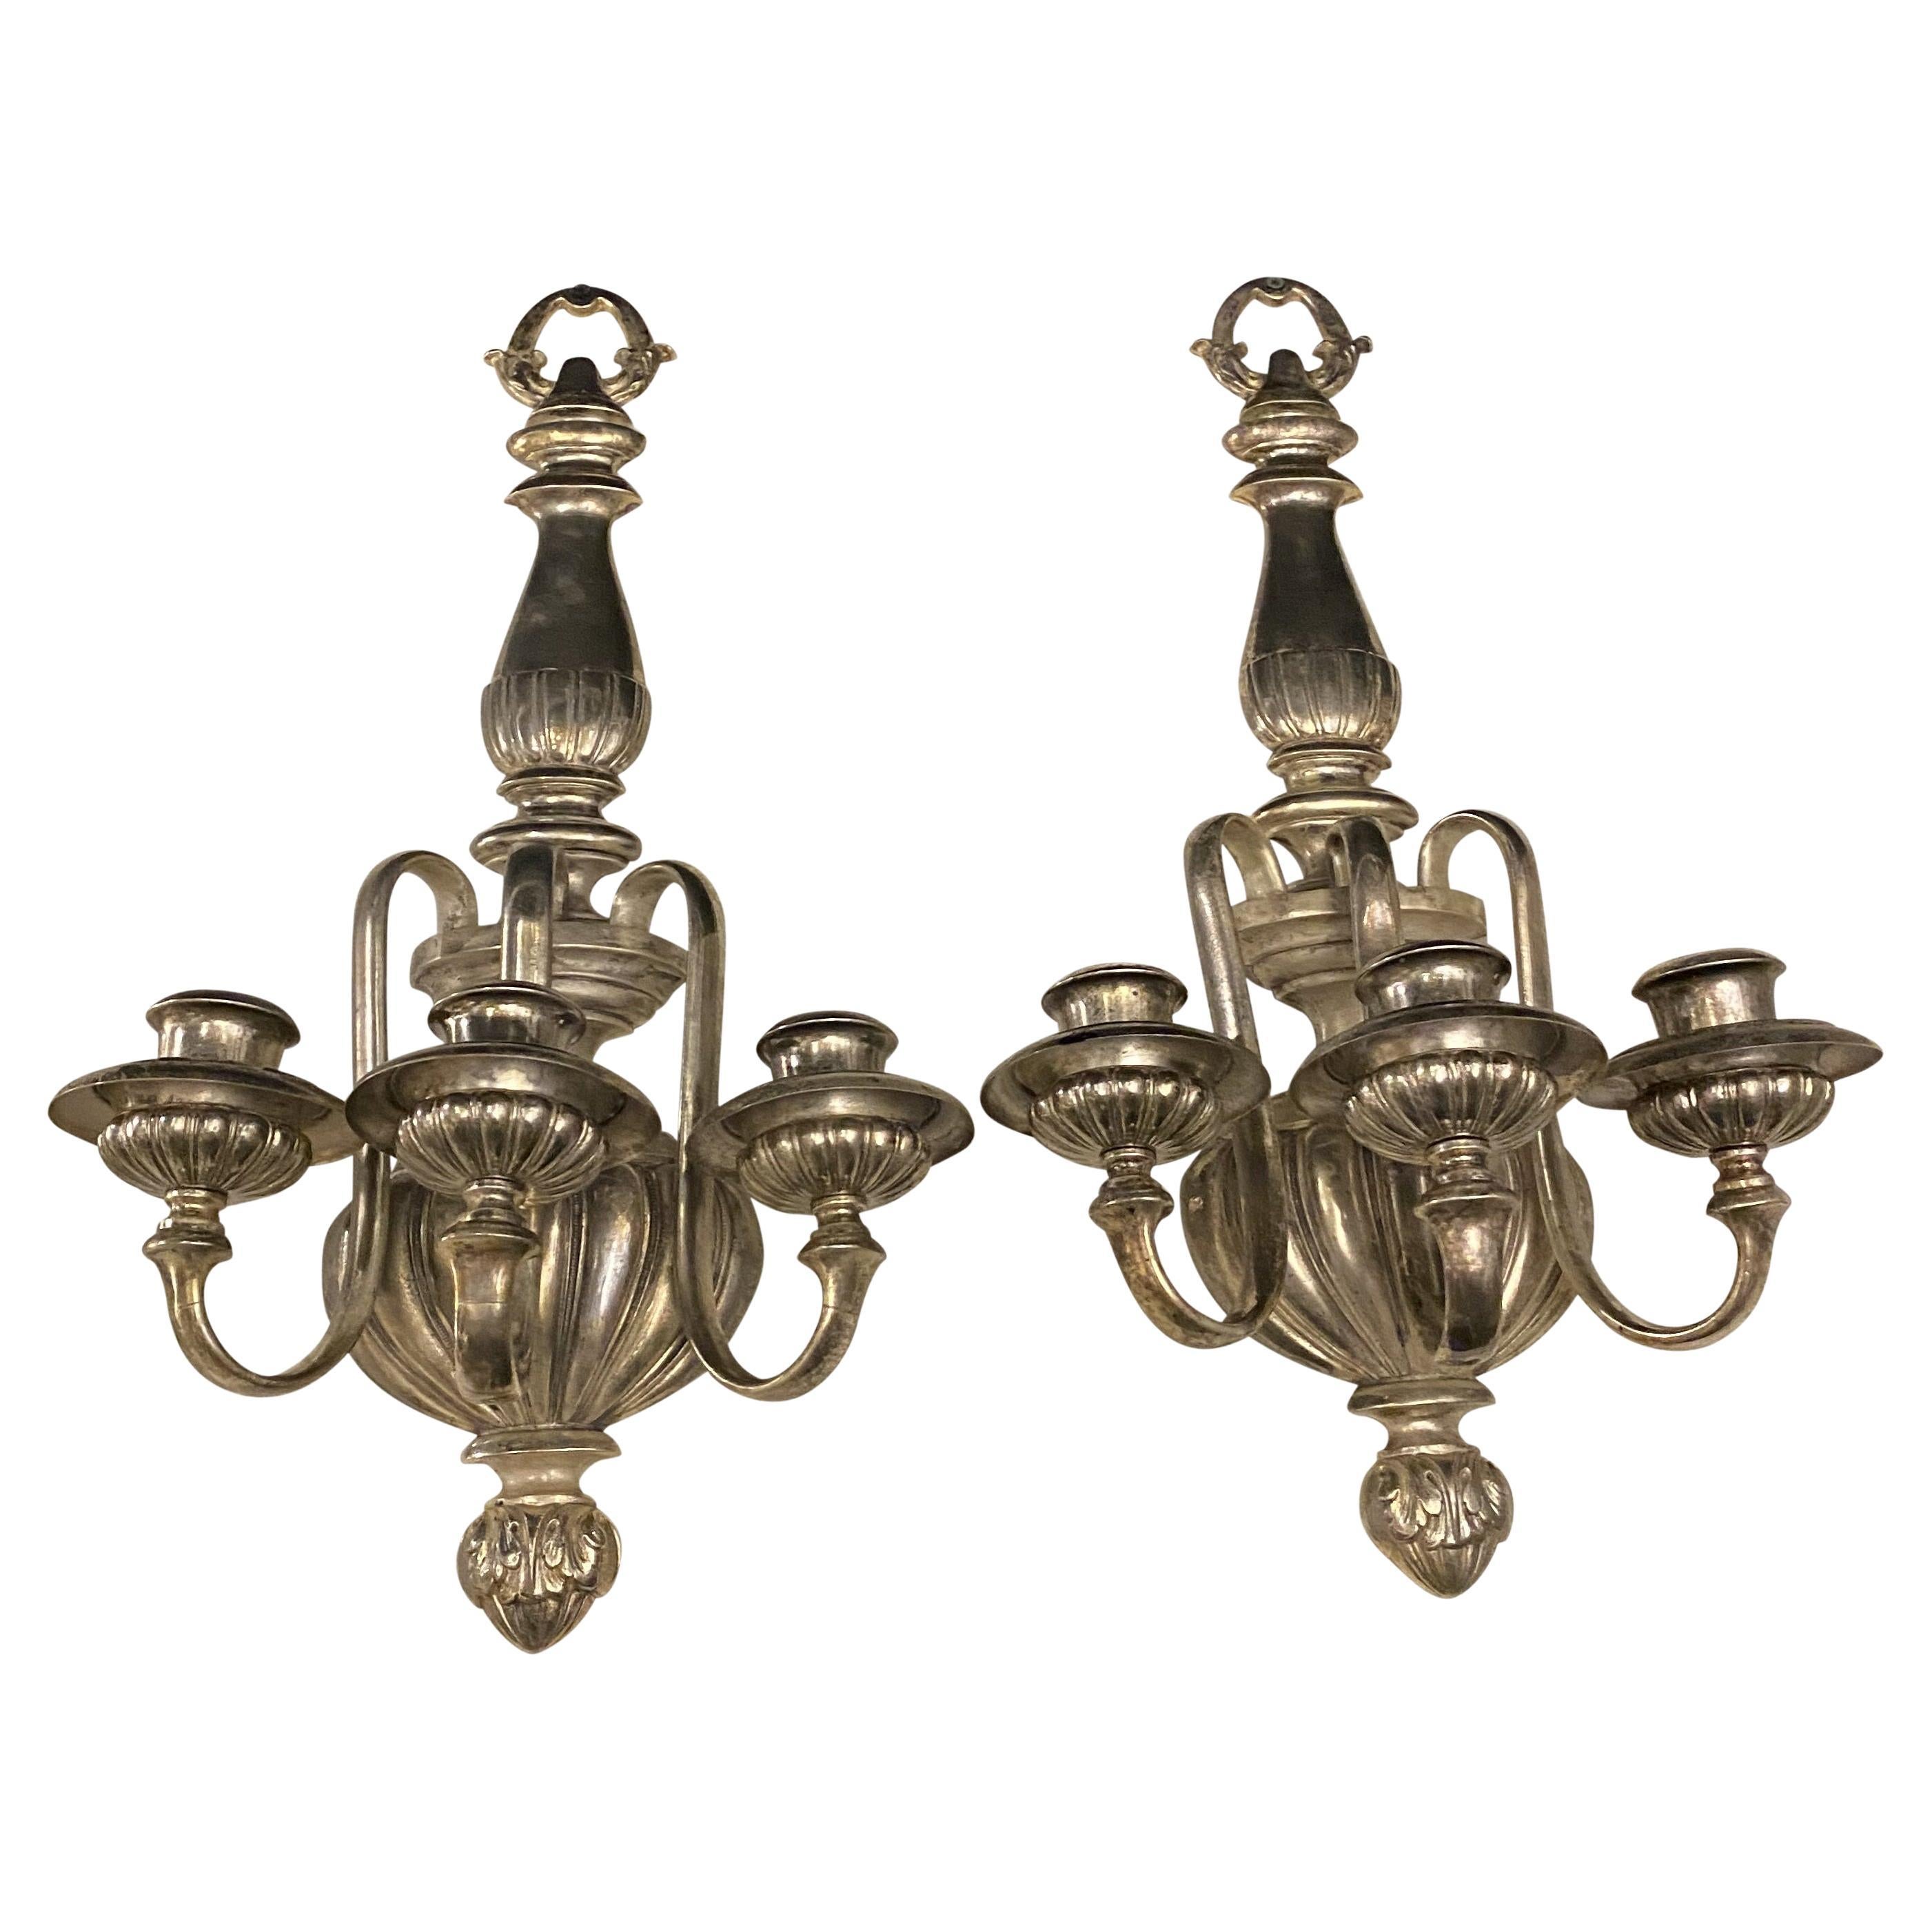 1920s Large Caldwell Silver Plated Sconces with thee lights en vente